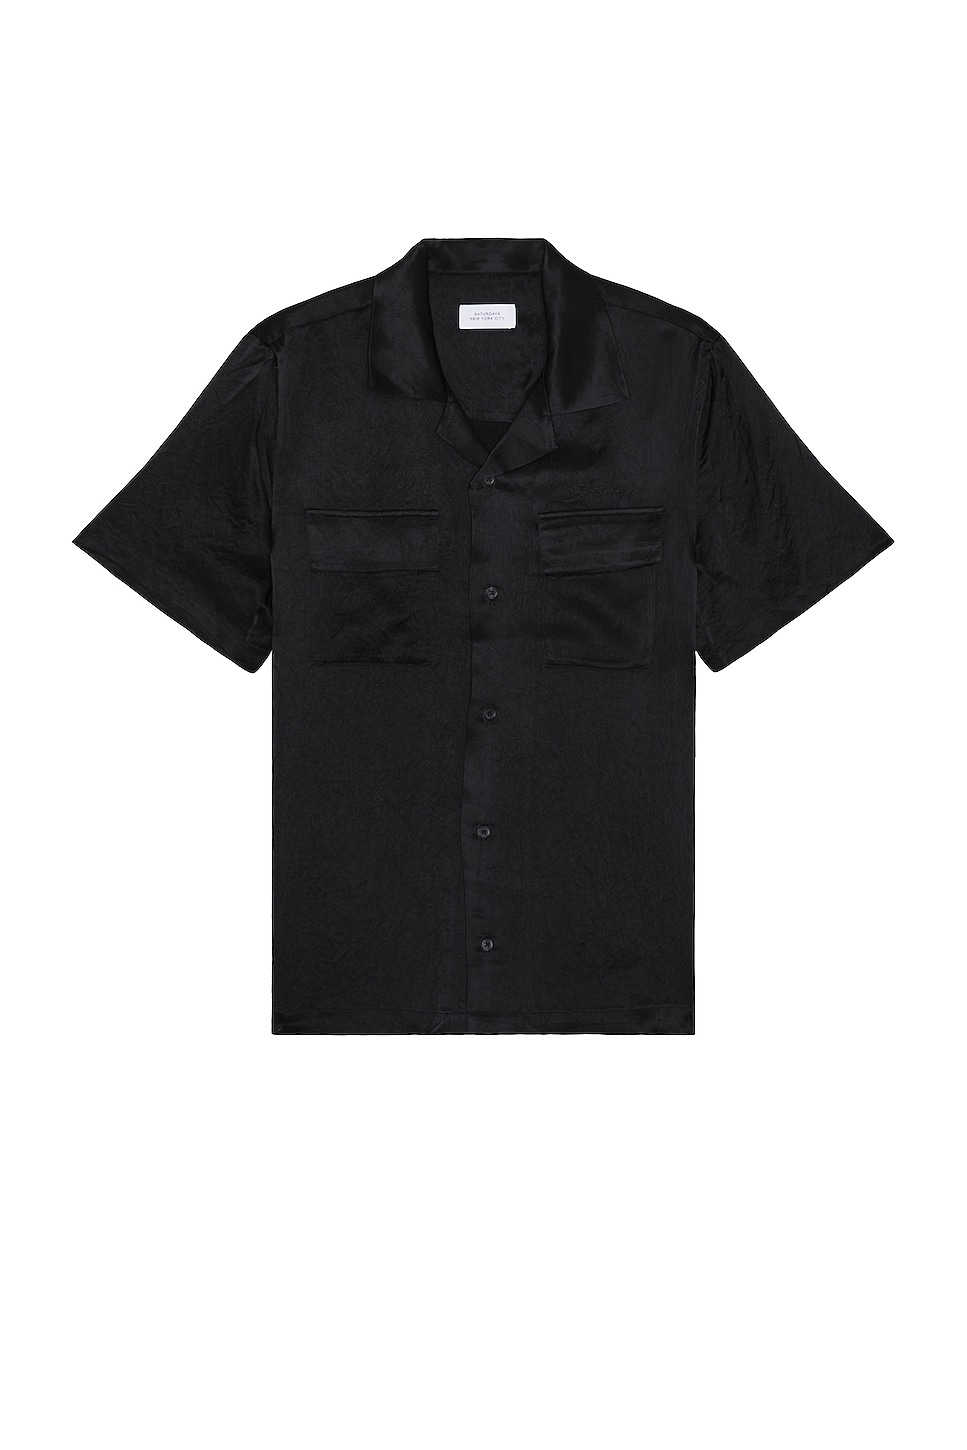 Image 1 of SATURDAYS NYC Canty Crinkled Satin Shirt in Black